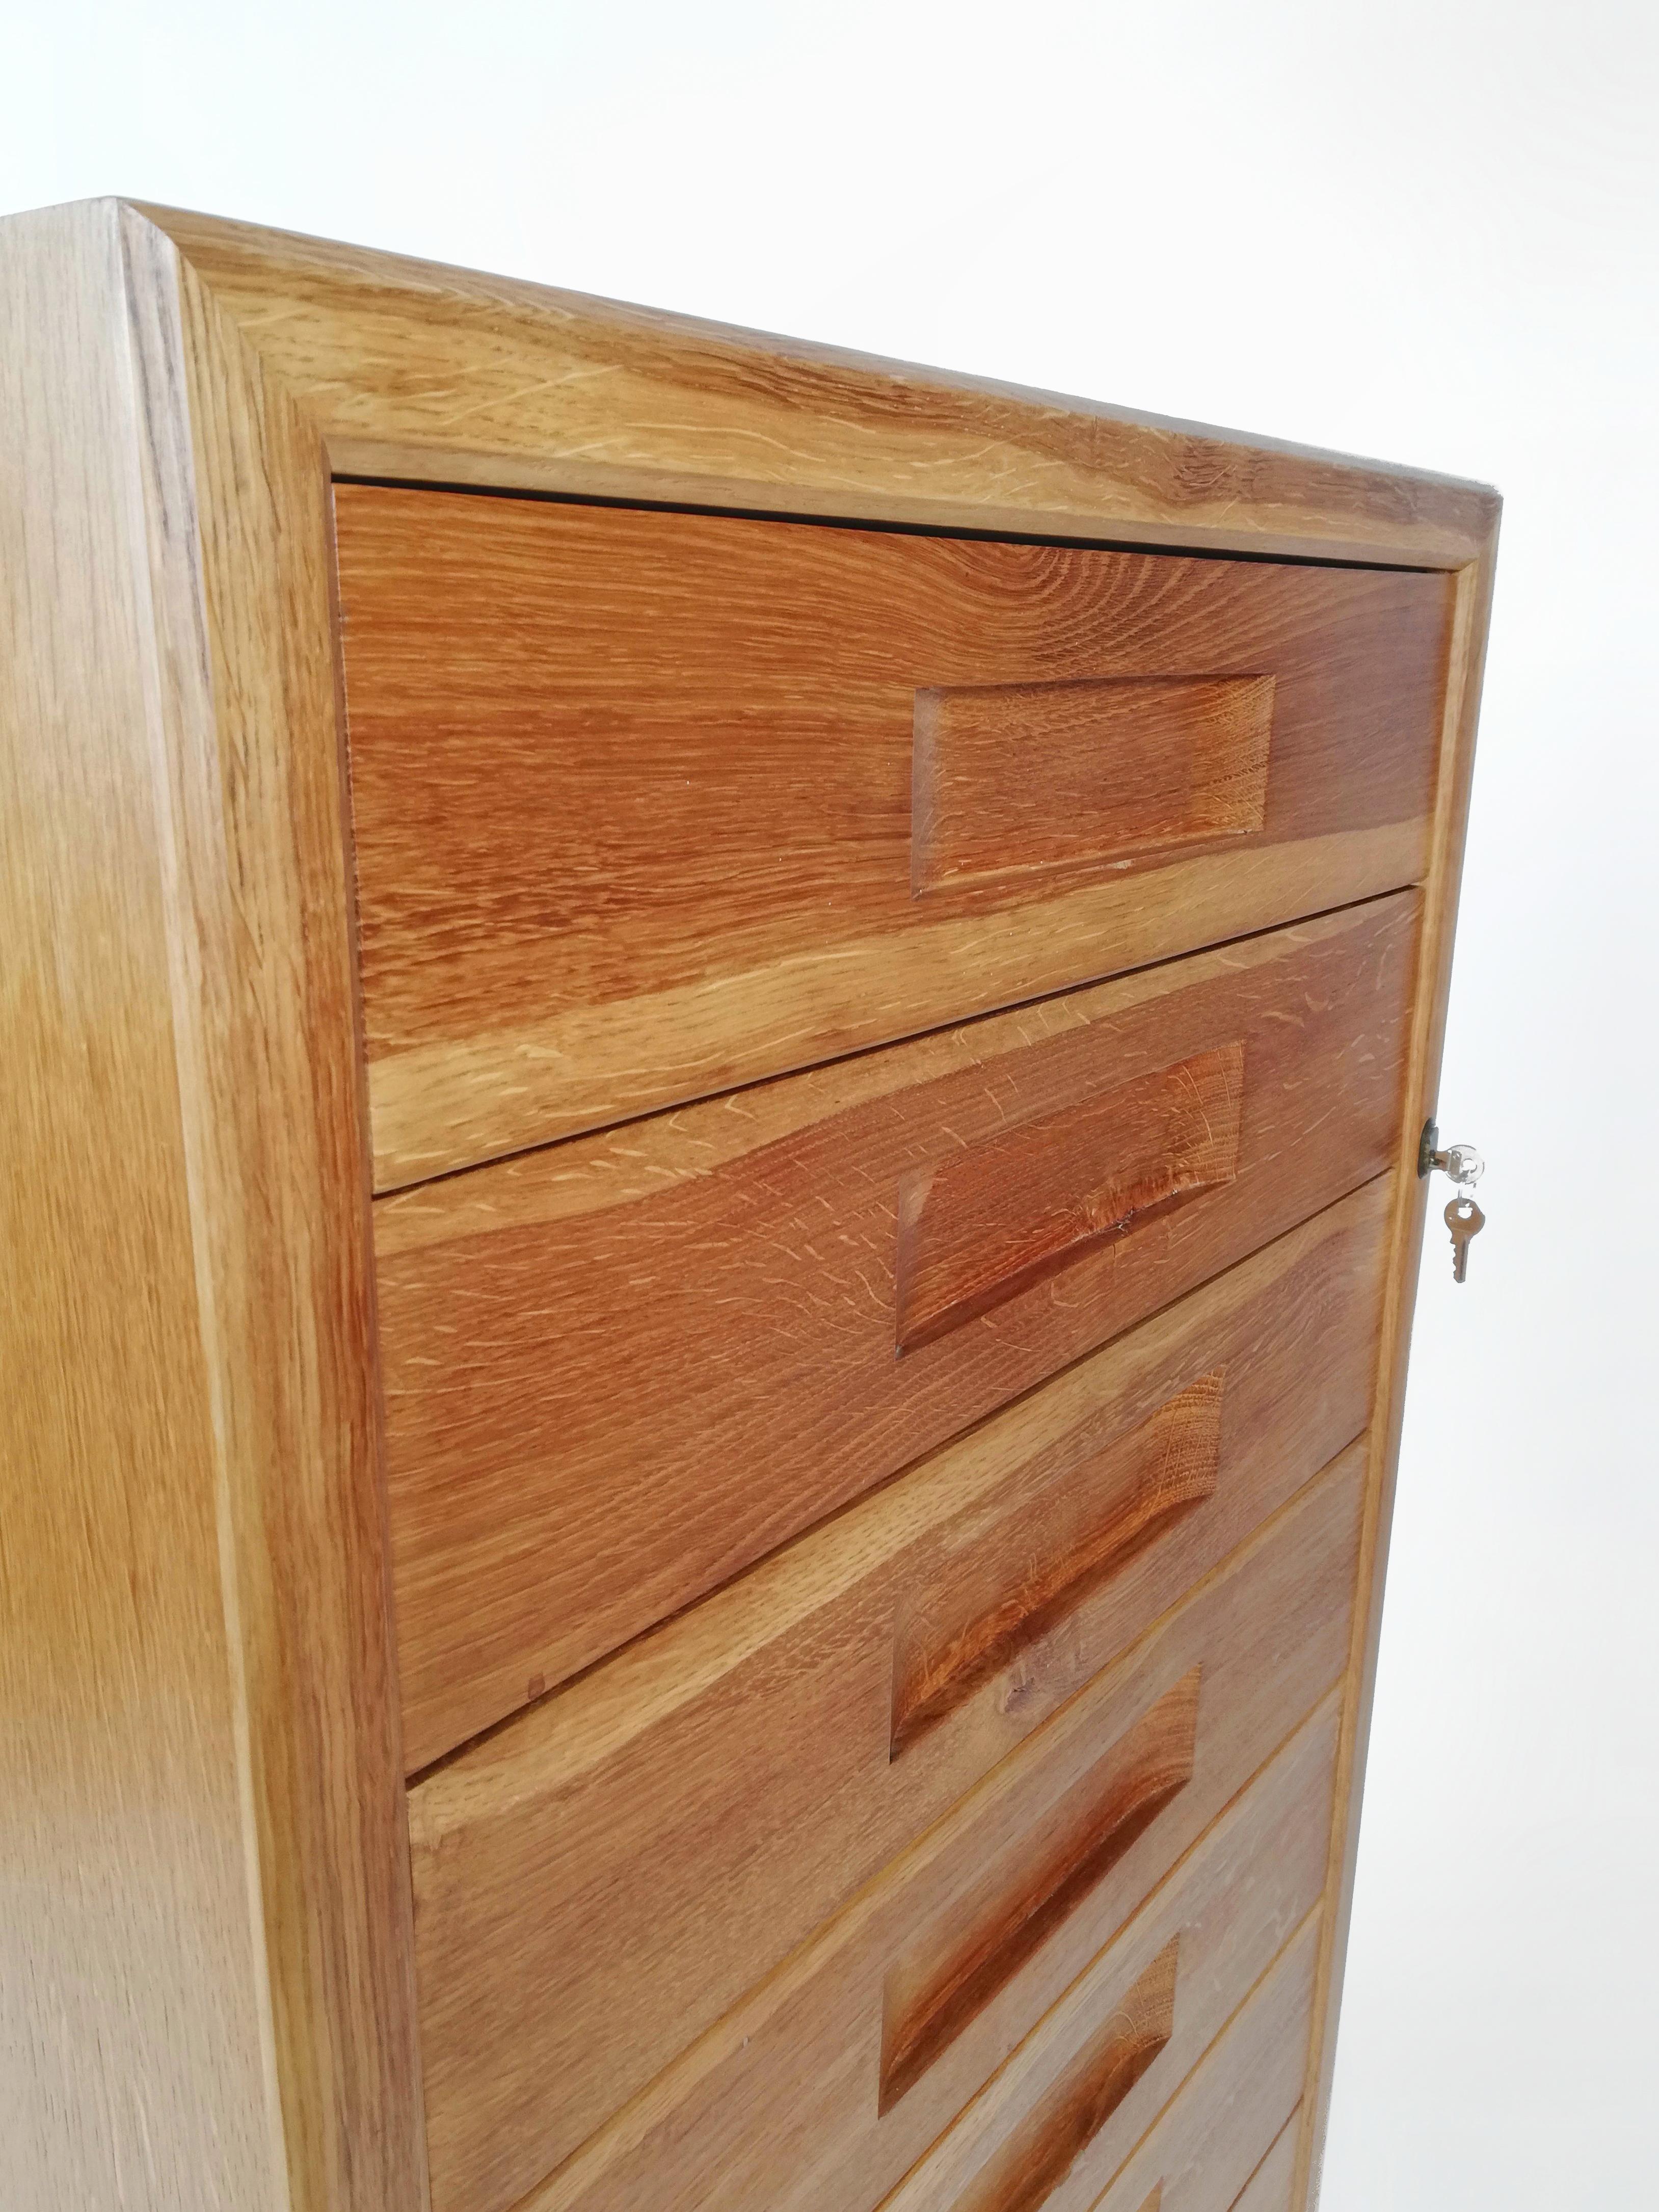 Italian Vintage Oak and Birch Wood Office Tallboy Chest of Drawers, 1960s For Sale 14